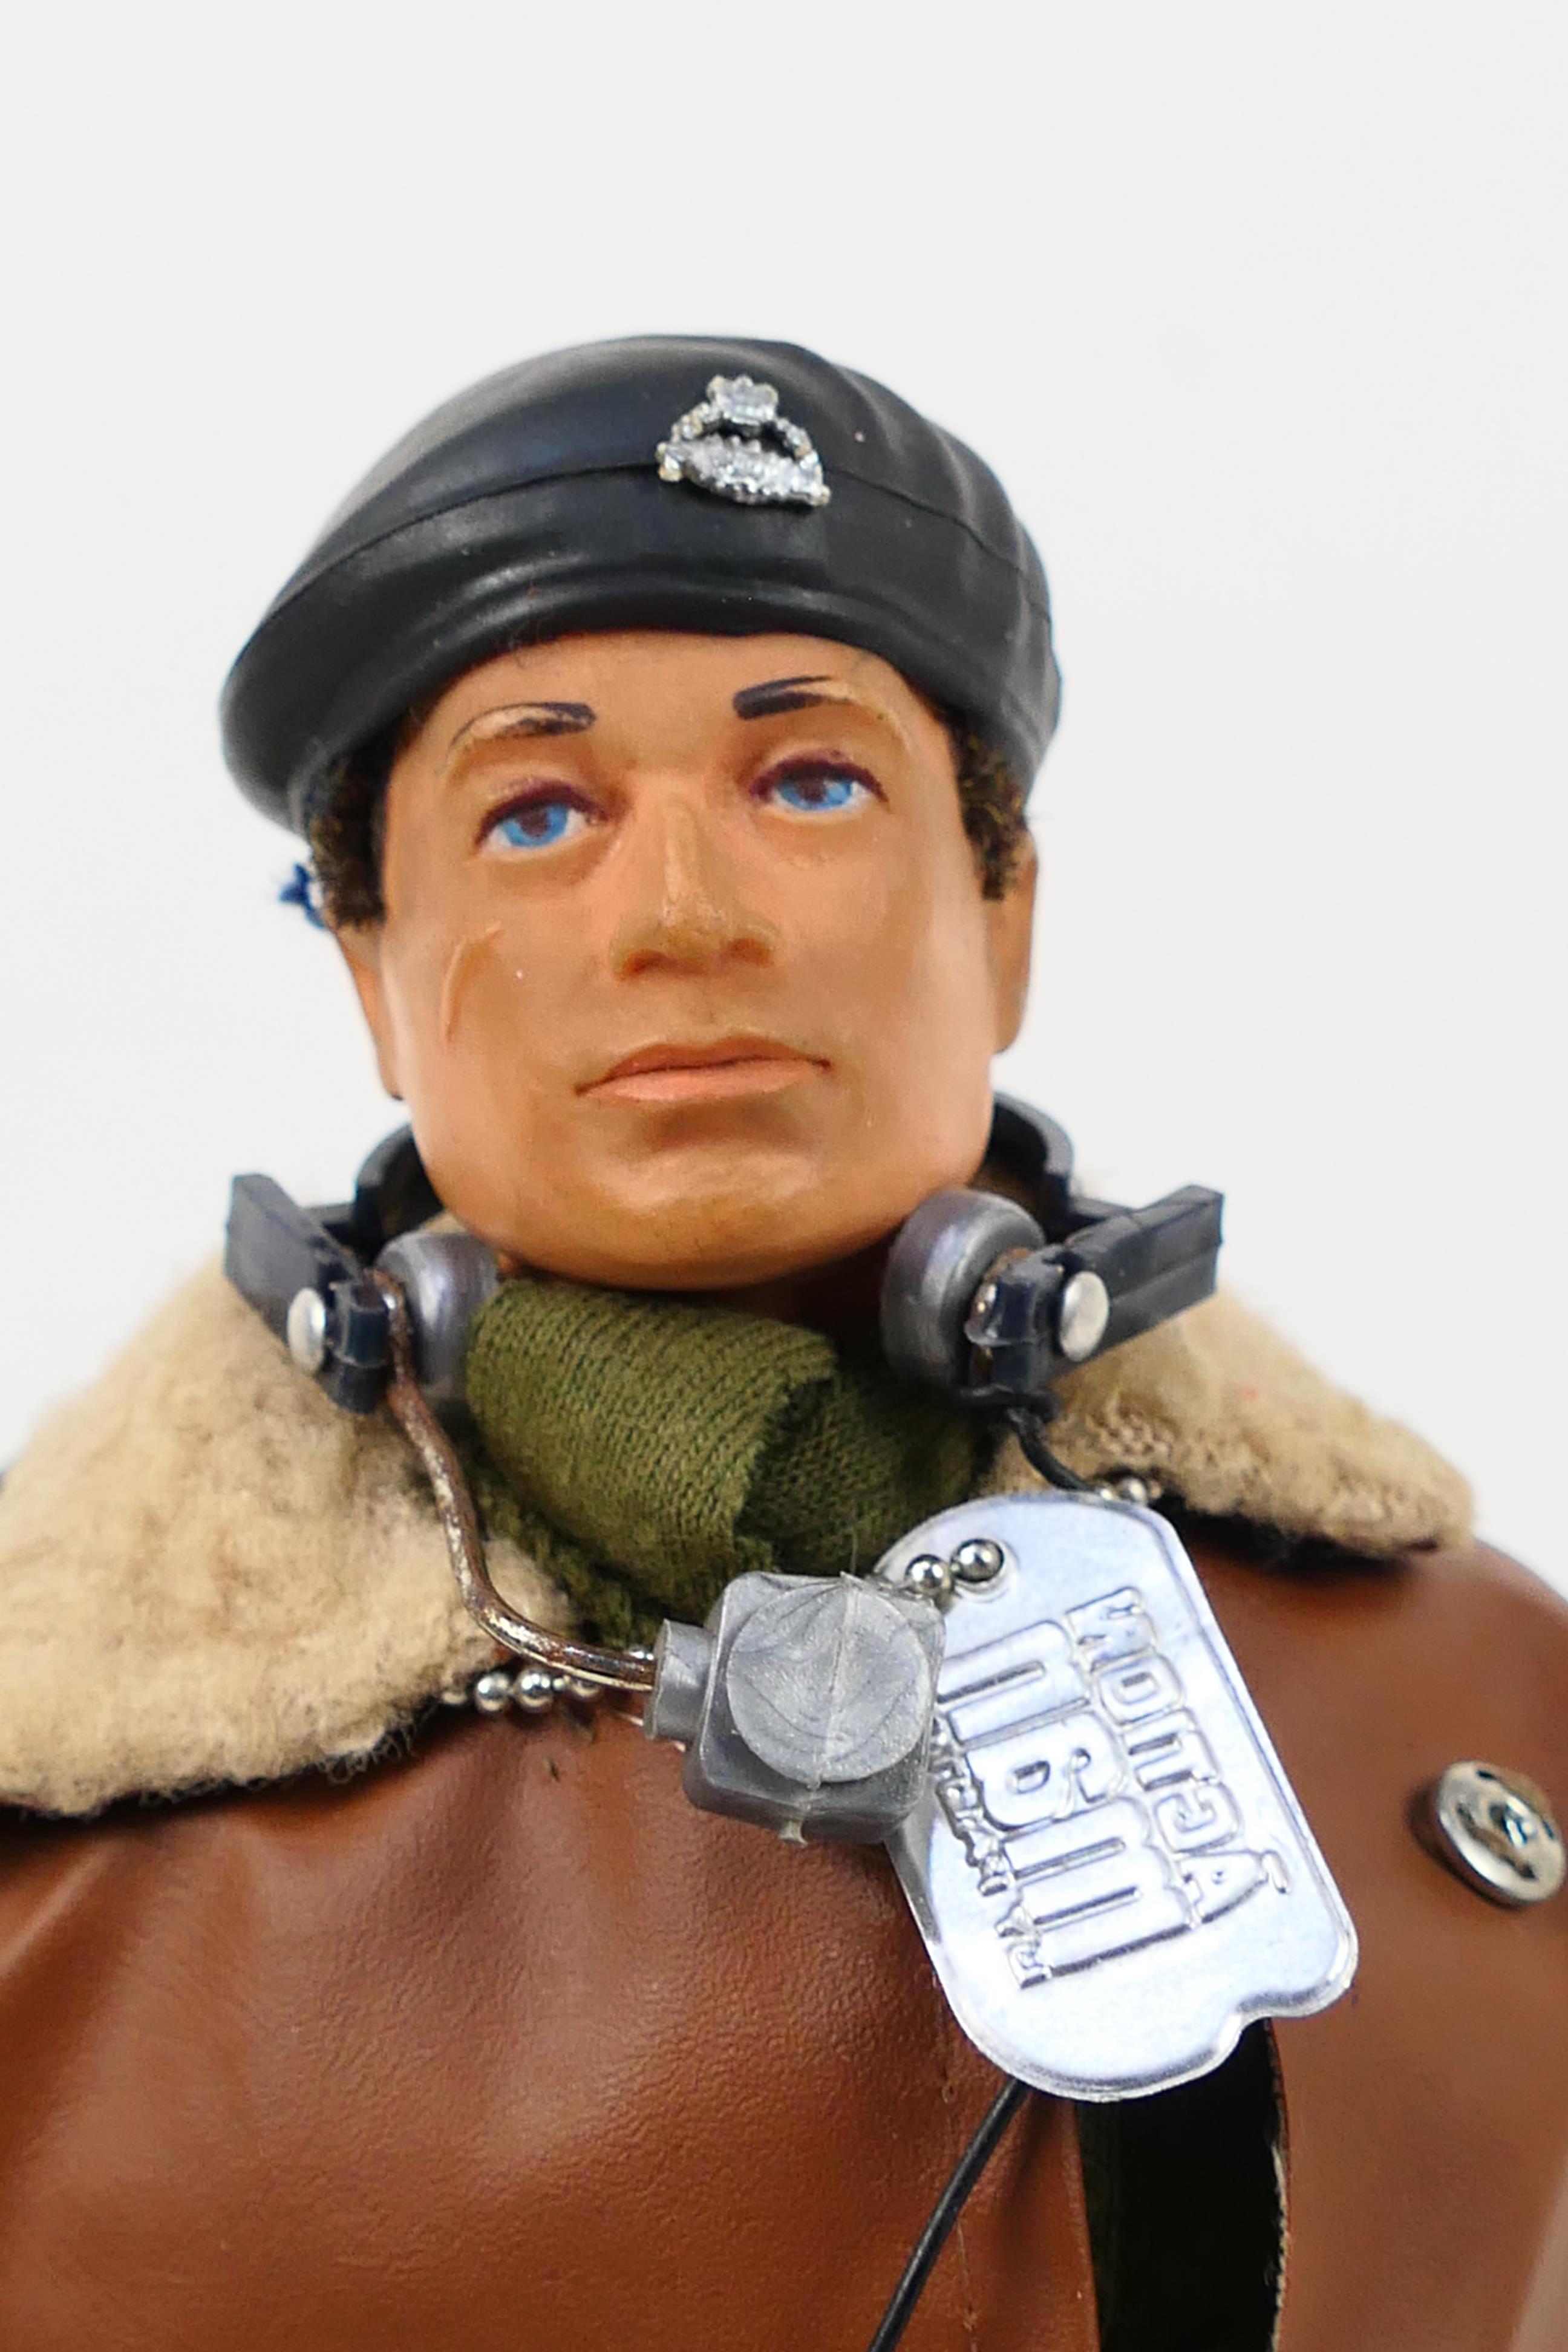 Palitoy - Action Man - Two unboxed vintage Action Man figures in Tank Commander and Parachute - Image 5 of 8